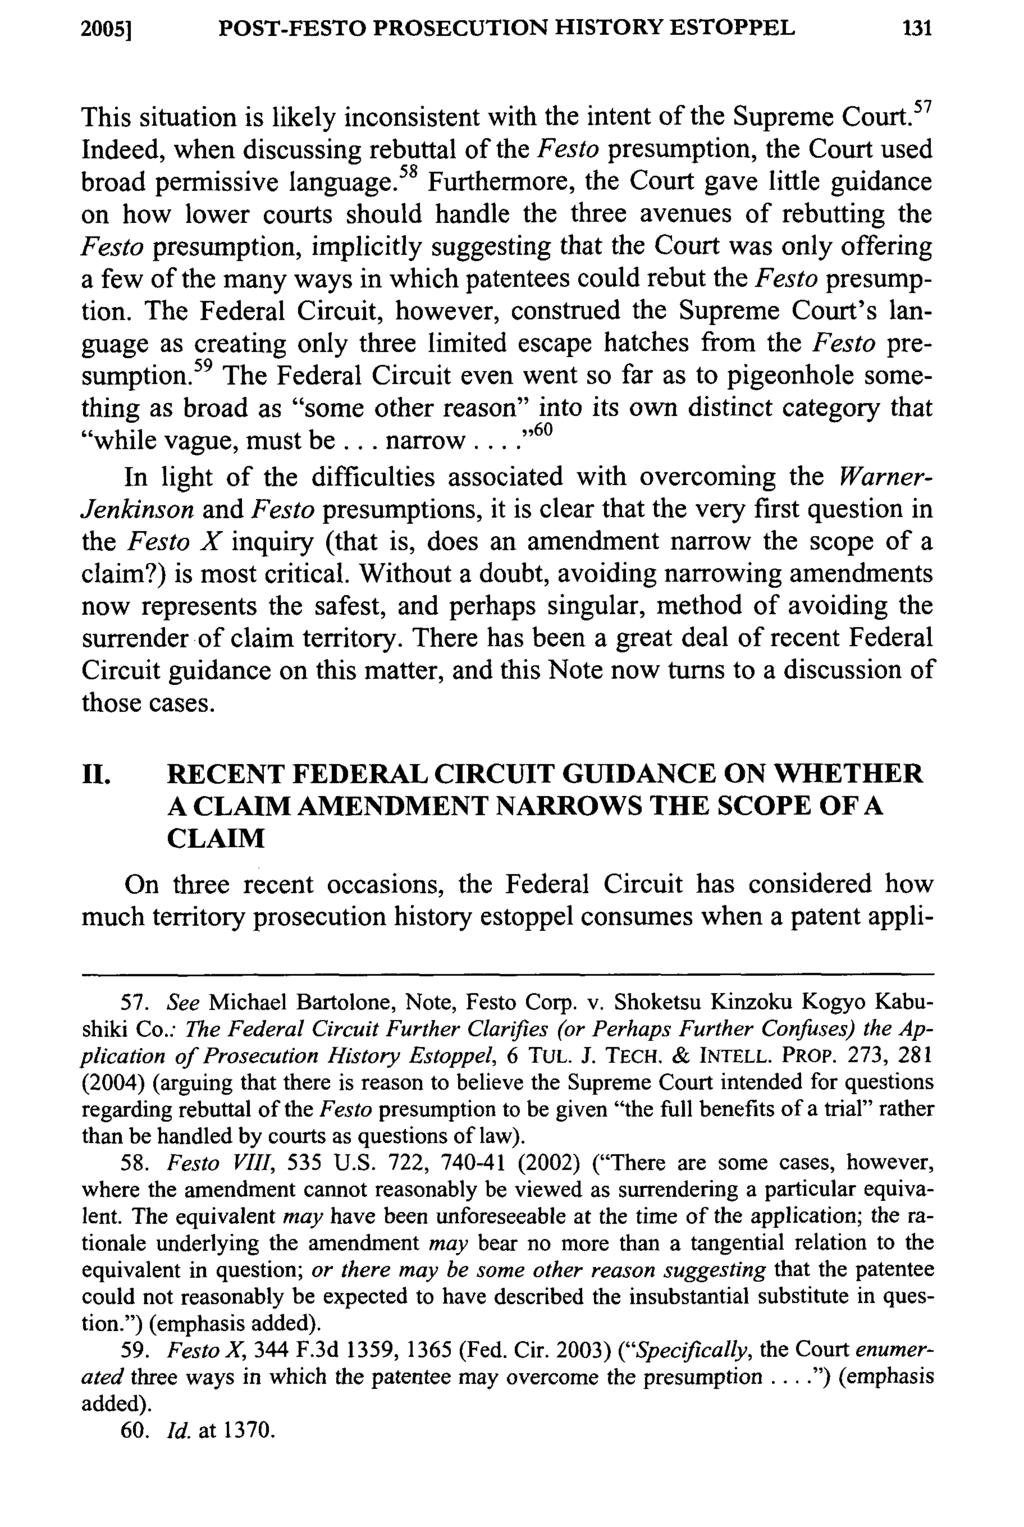 20051 POST-FESTO PROSECUTION HISTORY ESTOPPEL This situation is likely inconsistent with the intent of the Supreme Court.